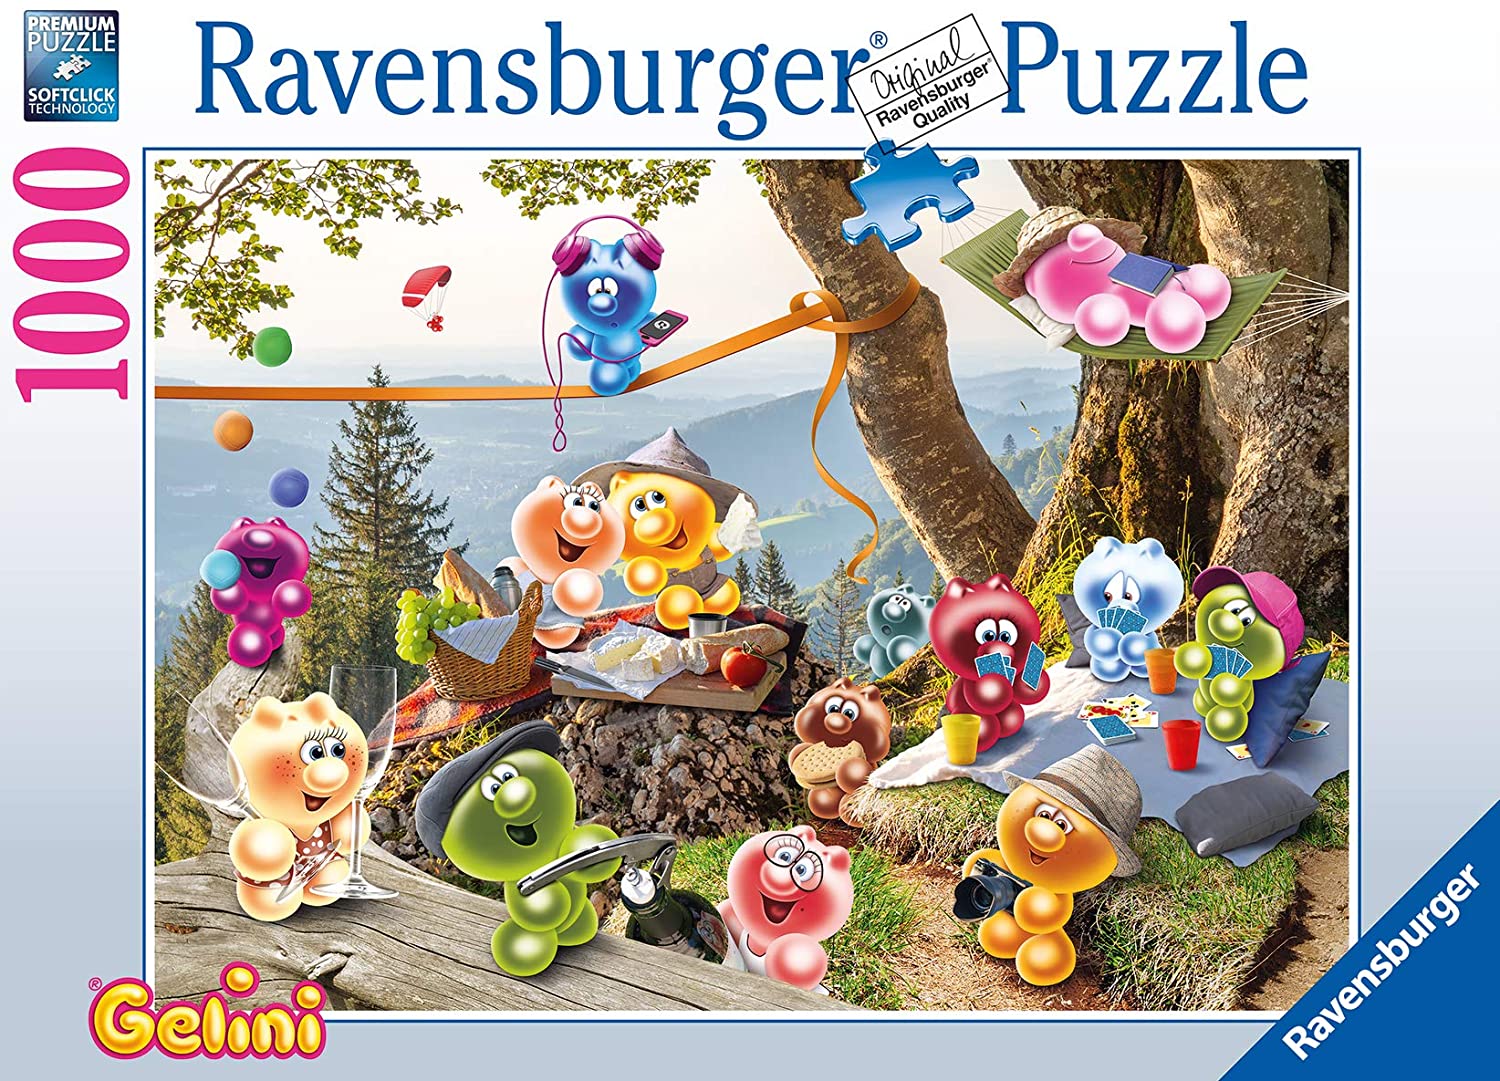 Ravensburger Gelini At the Picnic 1000 Piece Puzzle